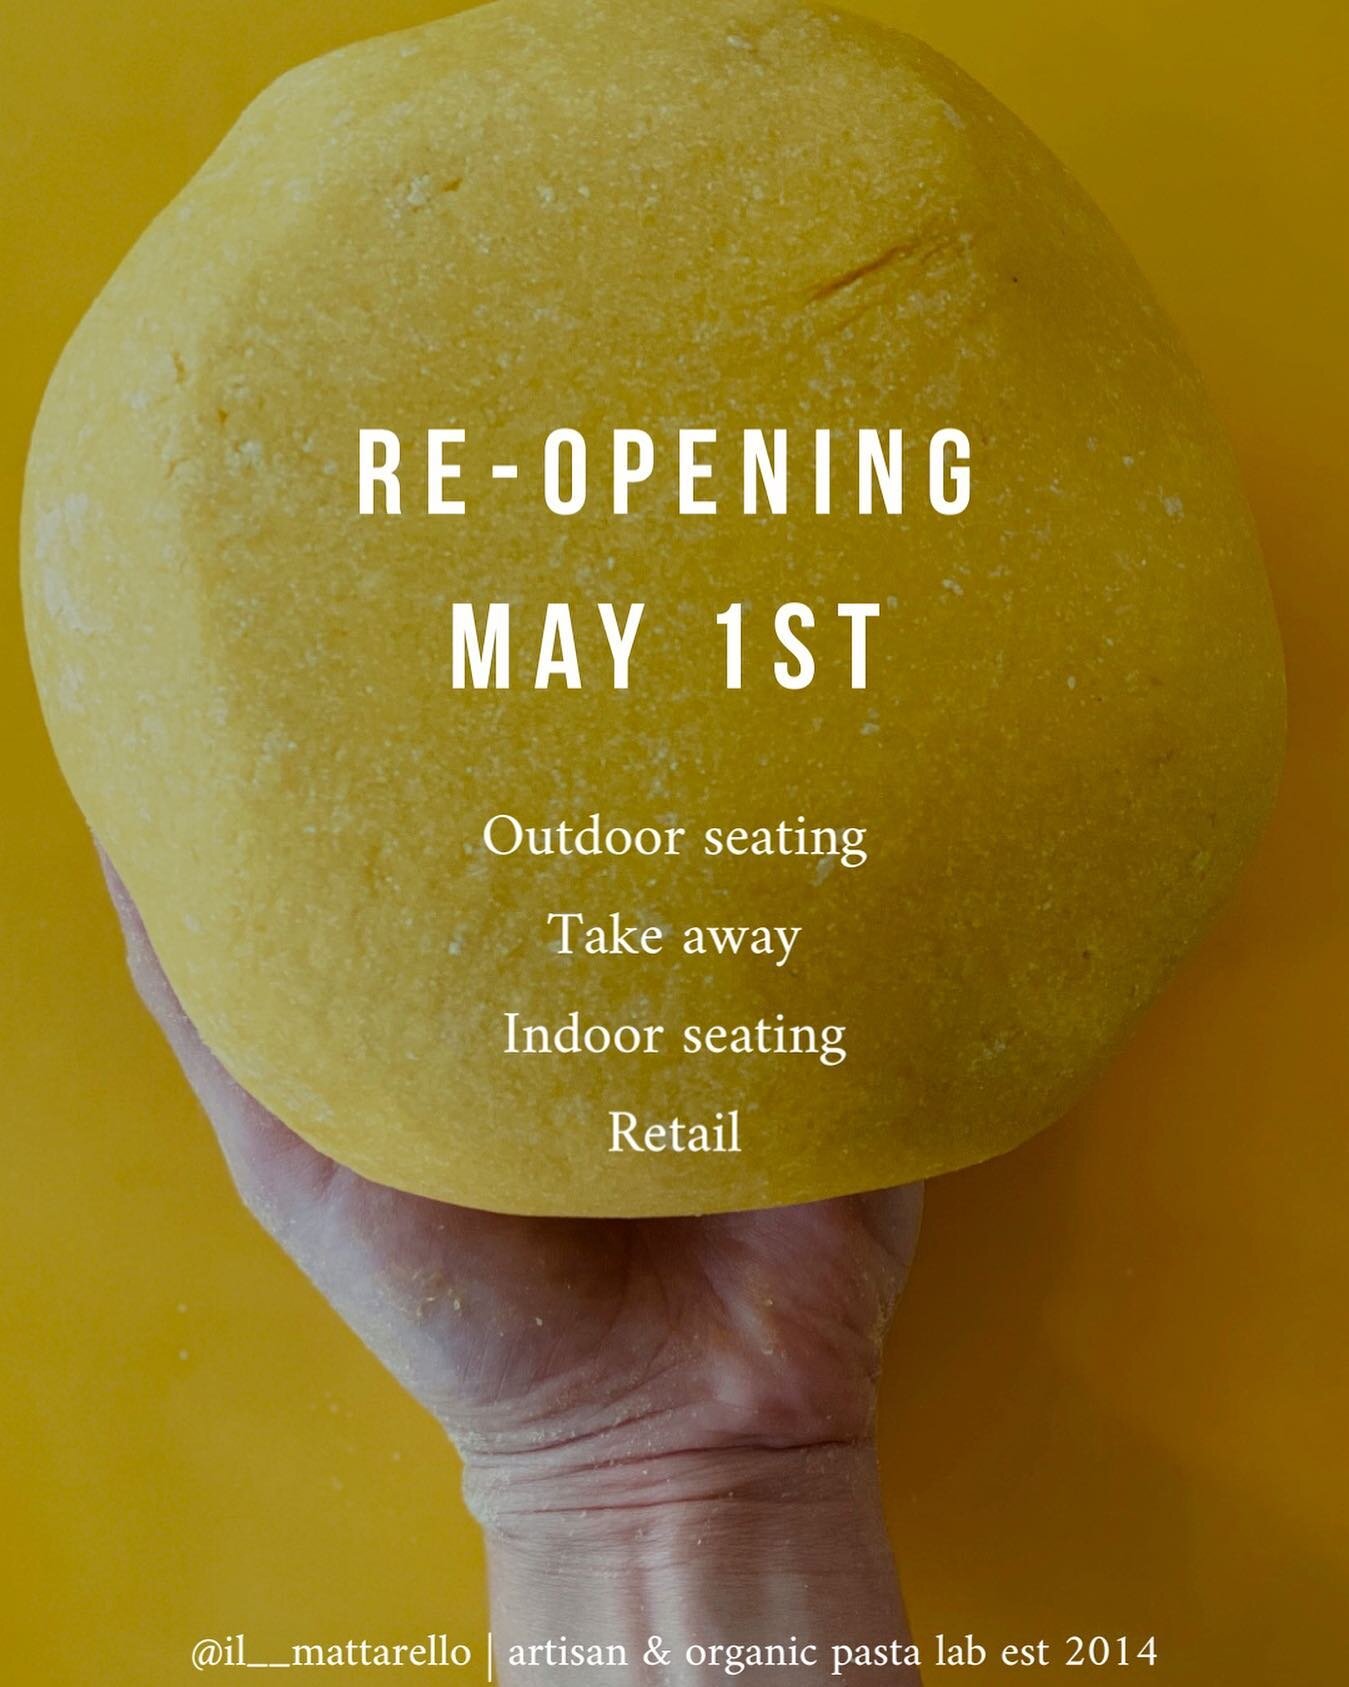 {re-opening}

Save the date May 1st.

Our pasta team is back with a lot of energy!

Here a little help on rules and restrictions:

&bull; Retail, Take away &amp; Outdoor seatings are available without #coronapas 

&bull; Indoor seating are available 